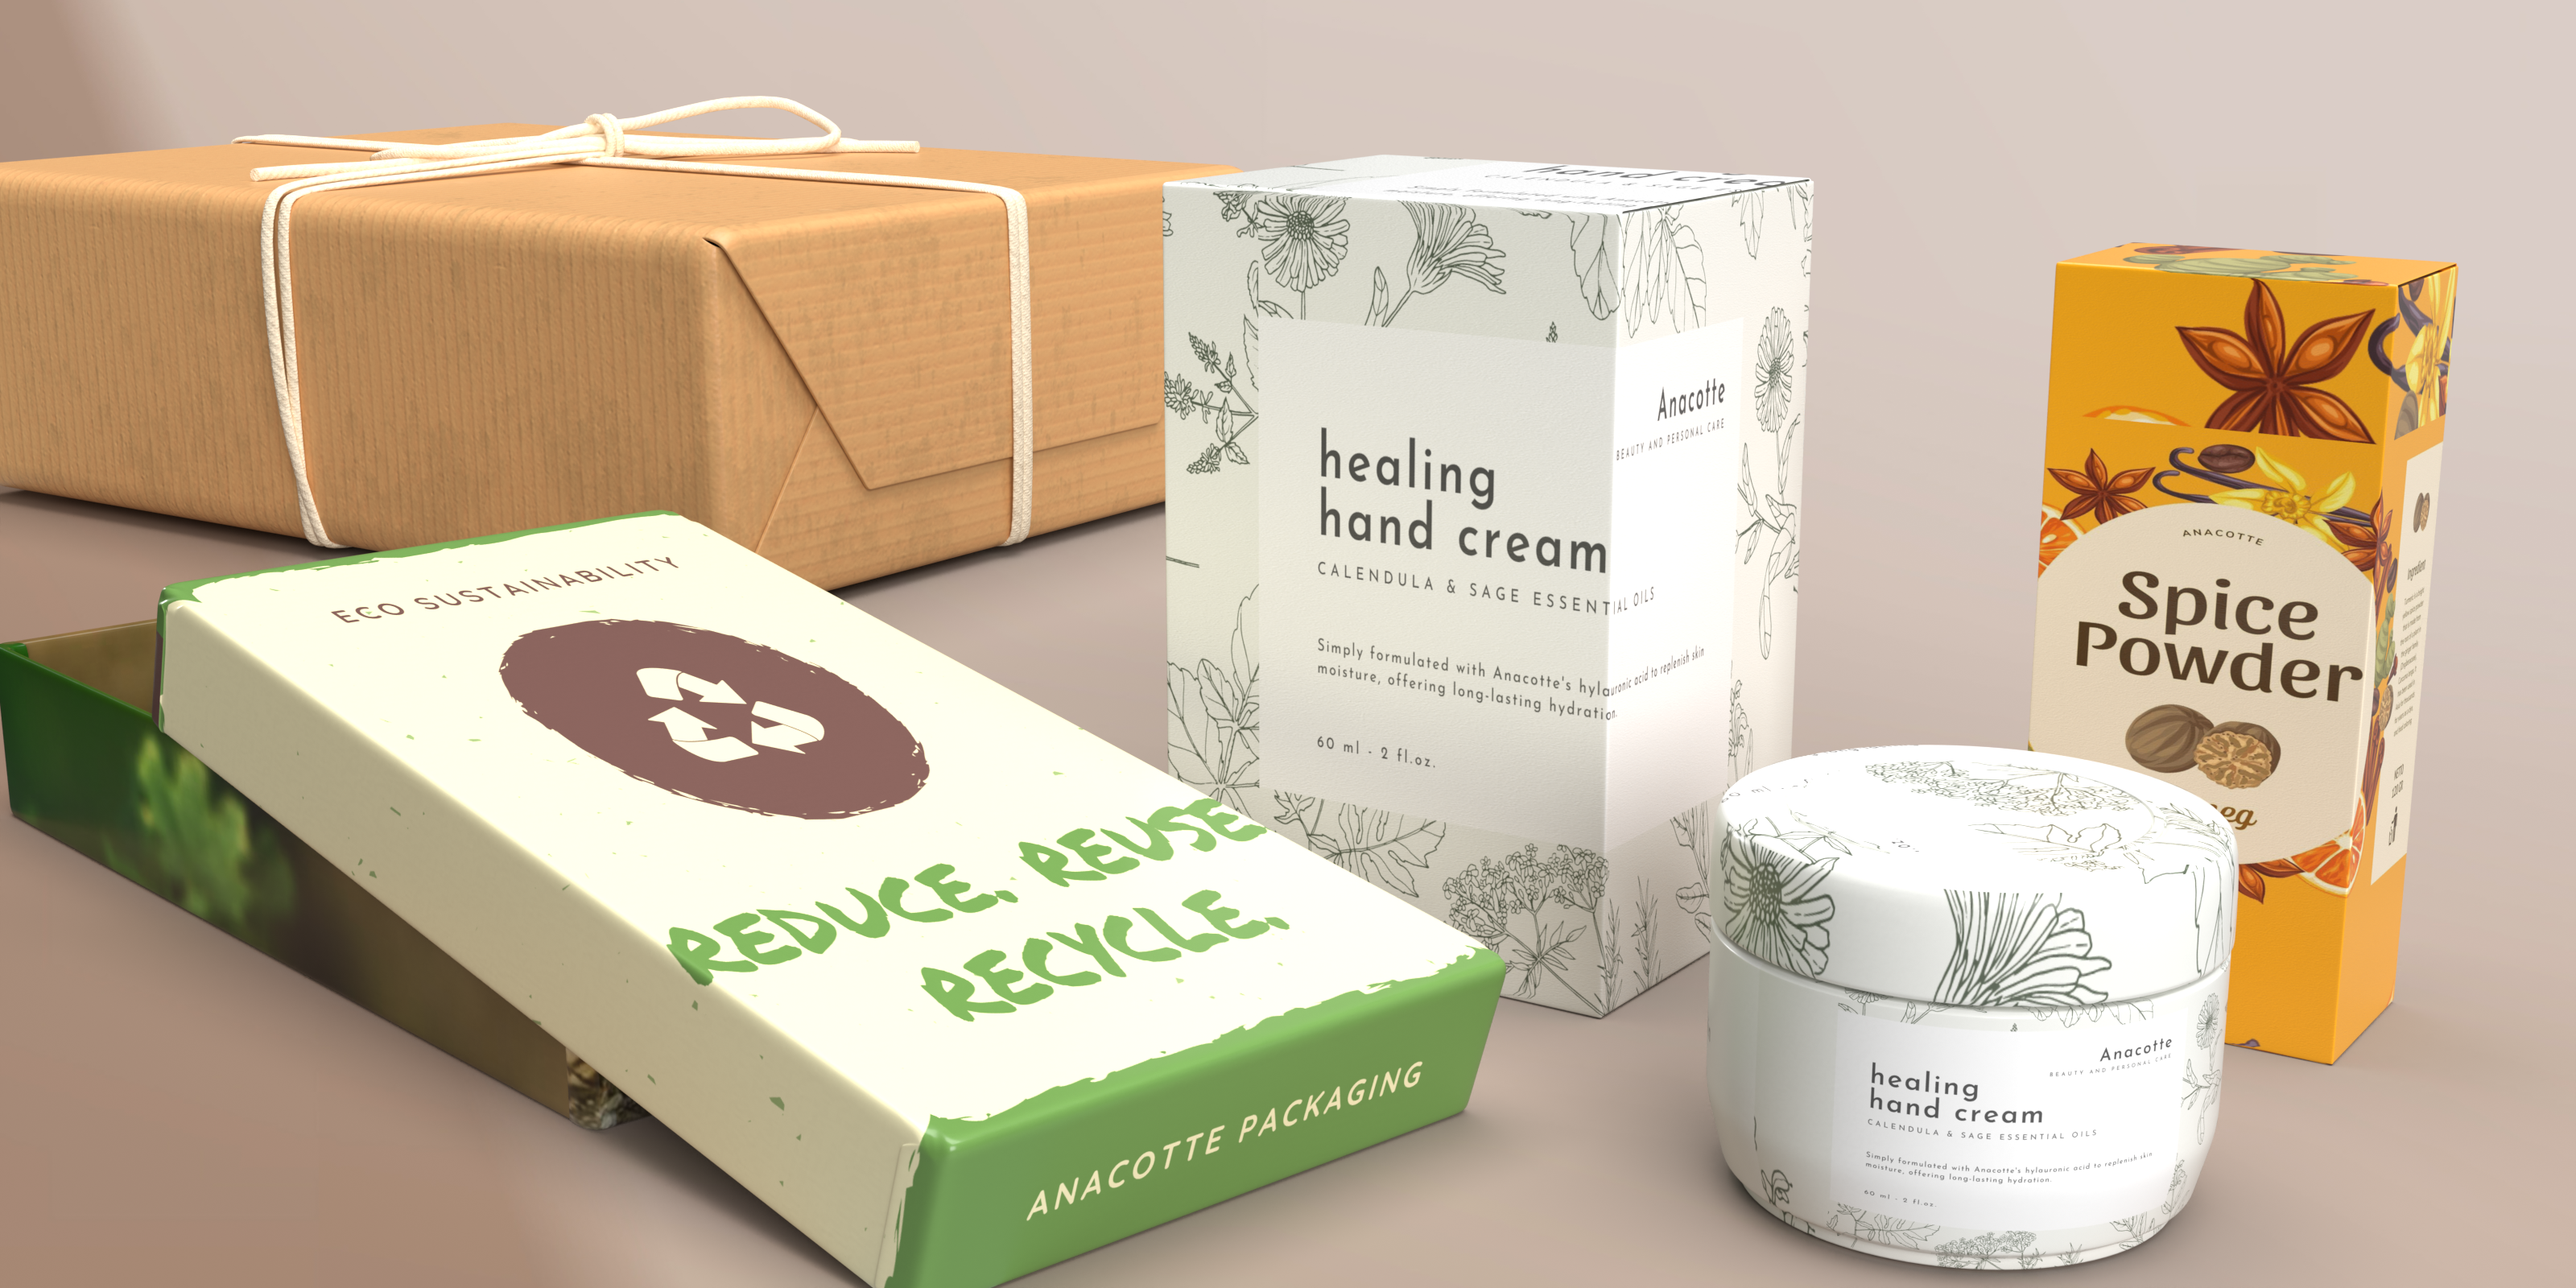 Rigid Packaging from Anacotte Packaging